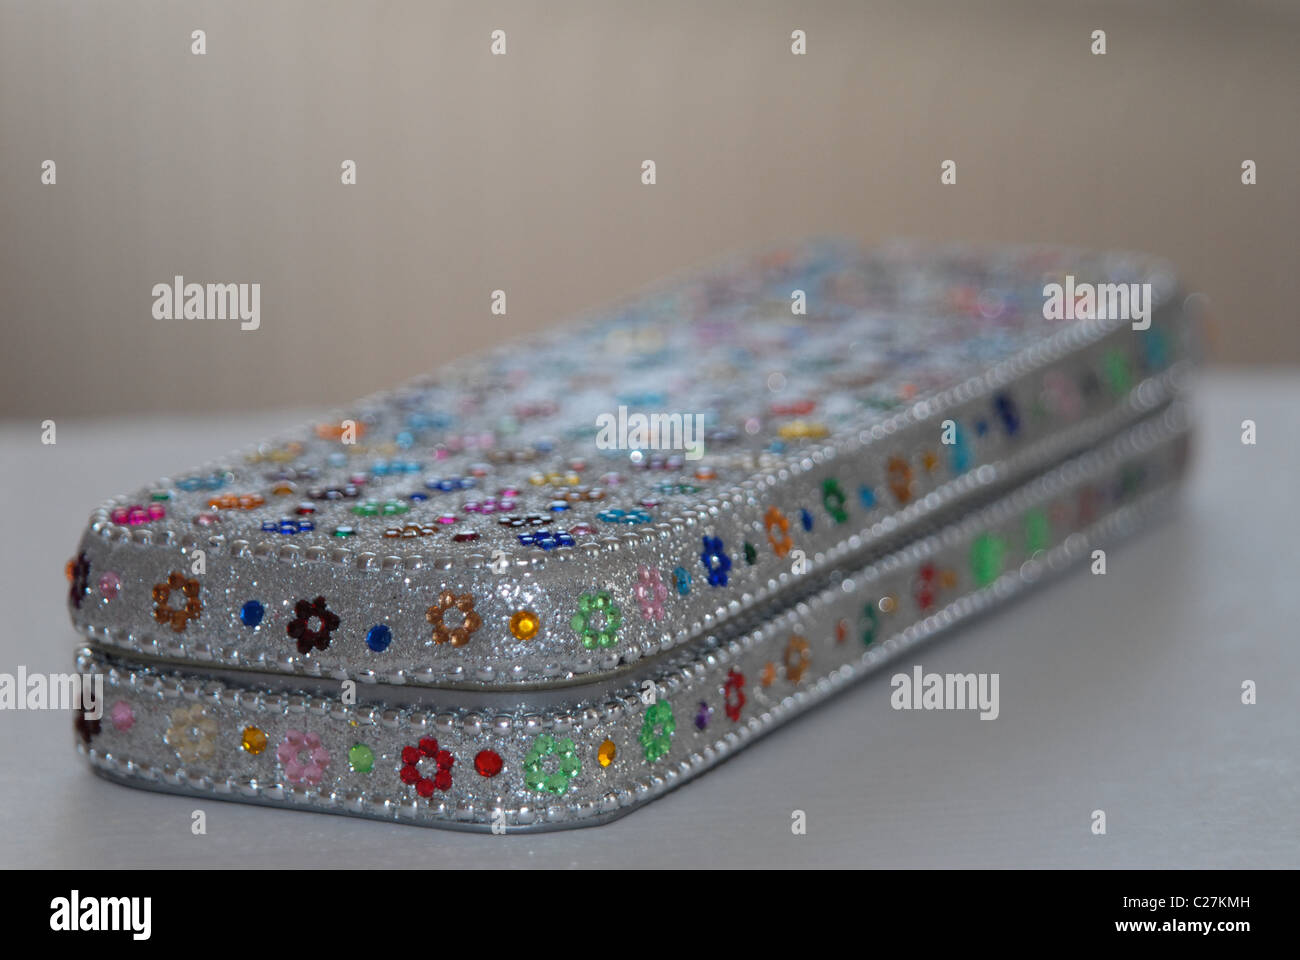 Pencil case decorated with gem stones on a desk Stock Photo - Alamy